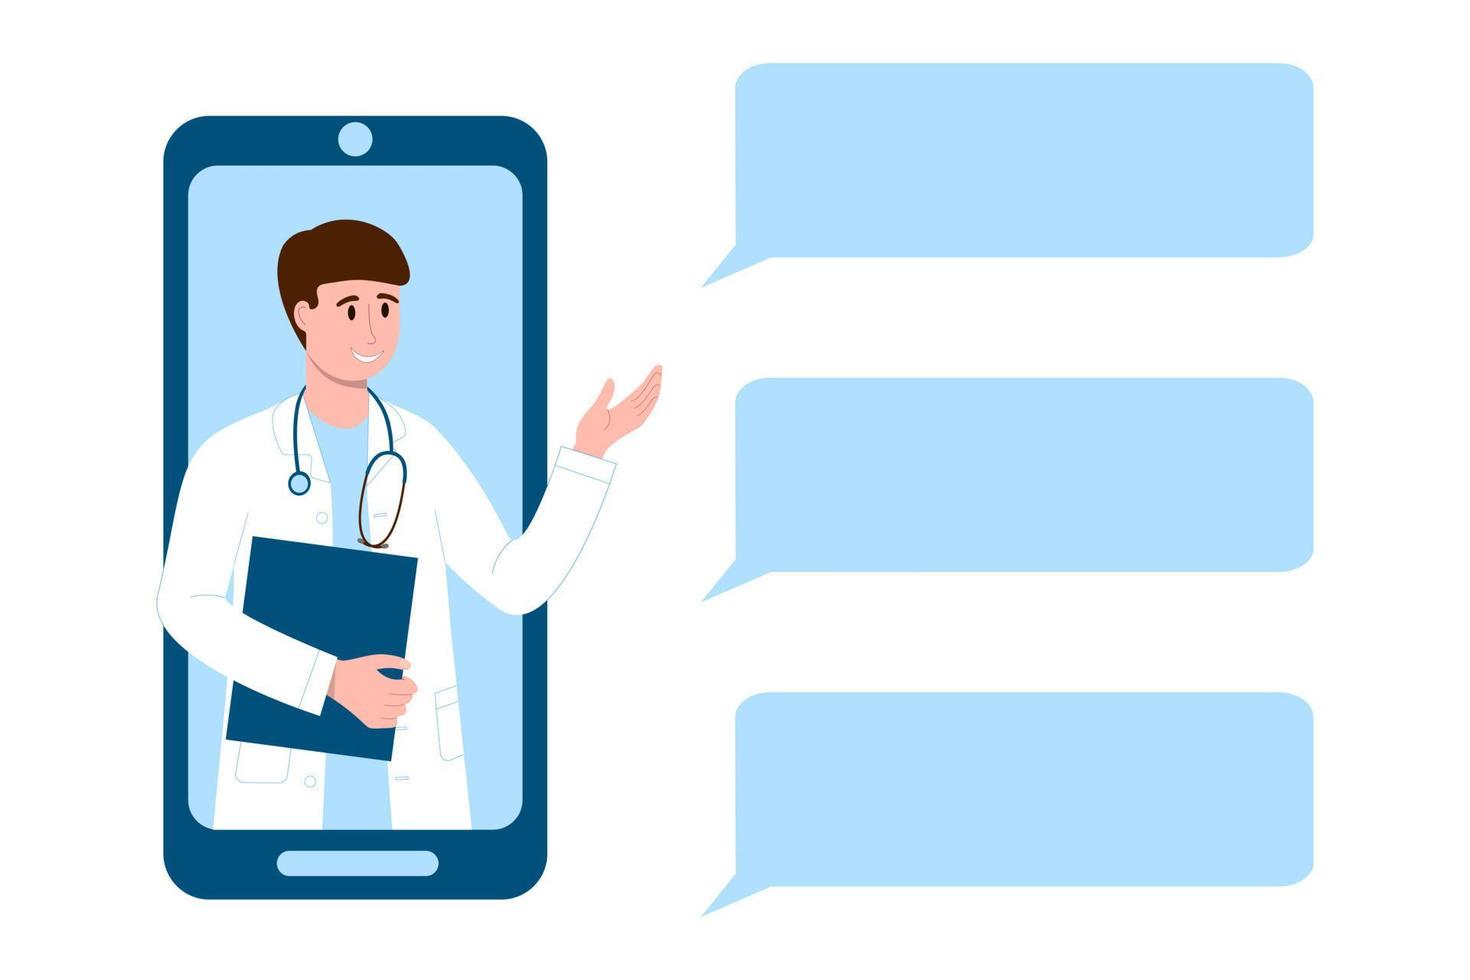 Male therapist give medical advices in message bubbles from smartphone screen. Online doctor, internet medical service, telemedicine, online healthcare consultation vector